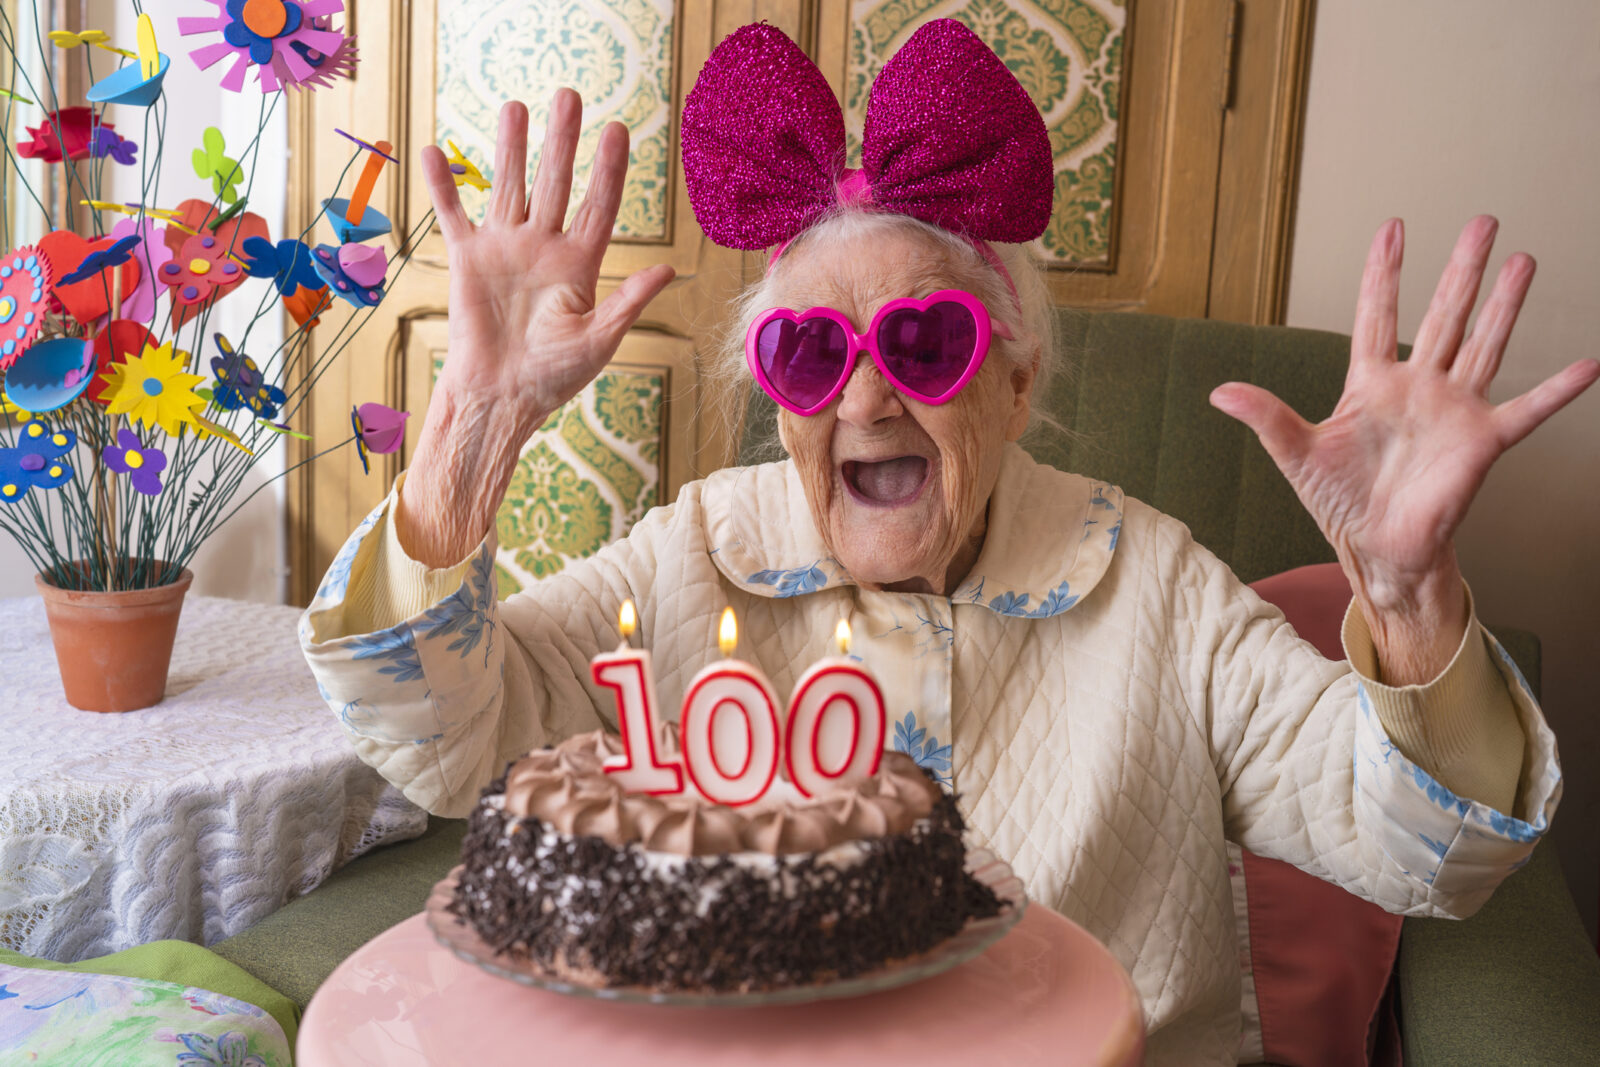 100 years old birthday cake to old woman elderly celebration funny humor